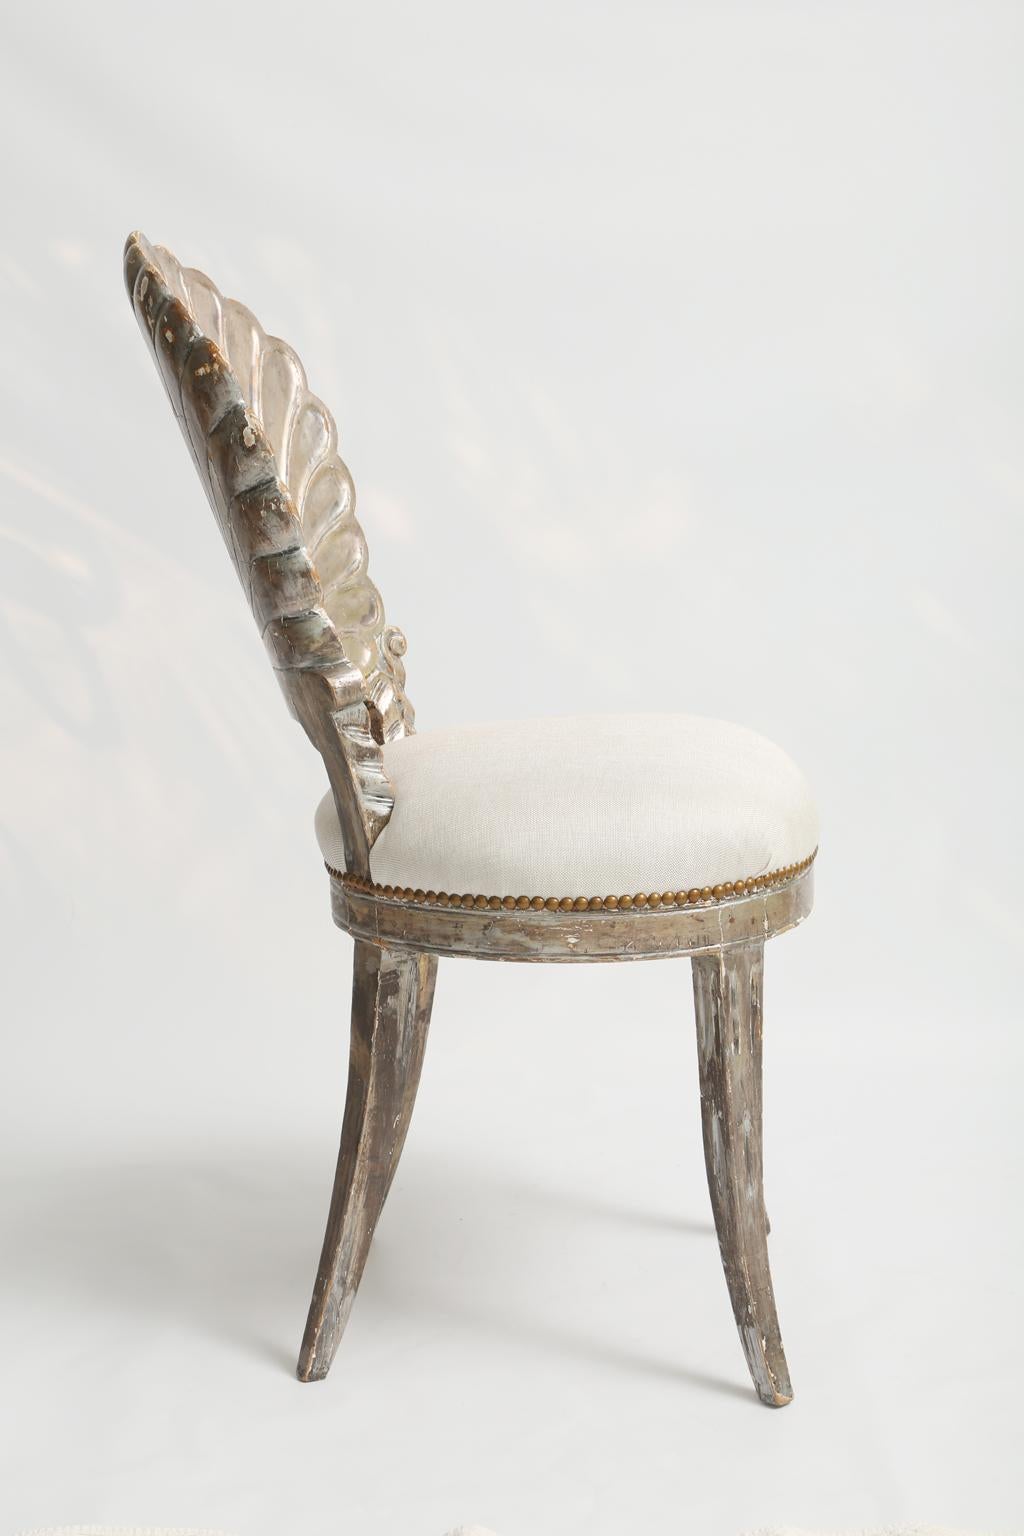 Carved Silver Gilt Venetian Scallop Shell Side Chair